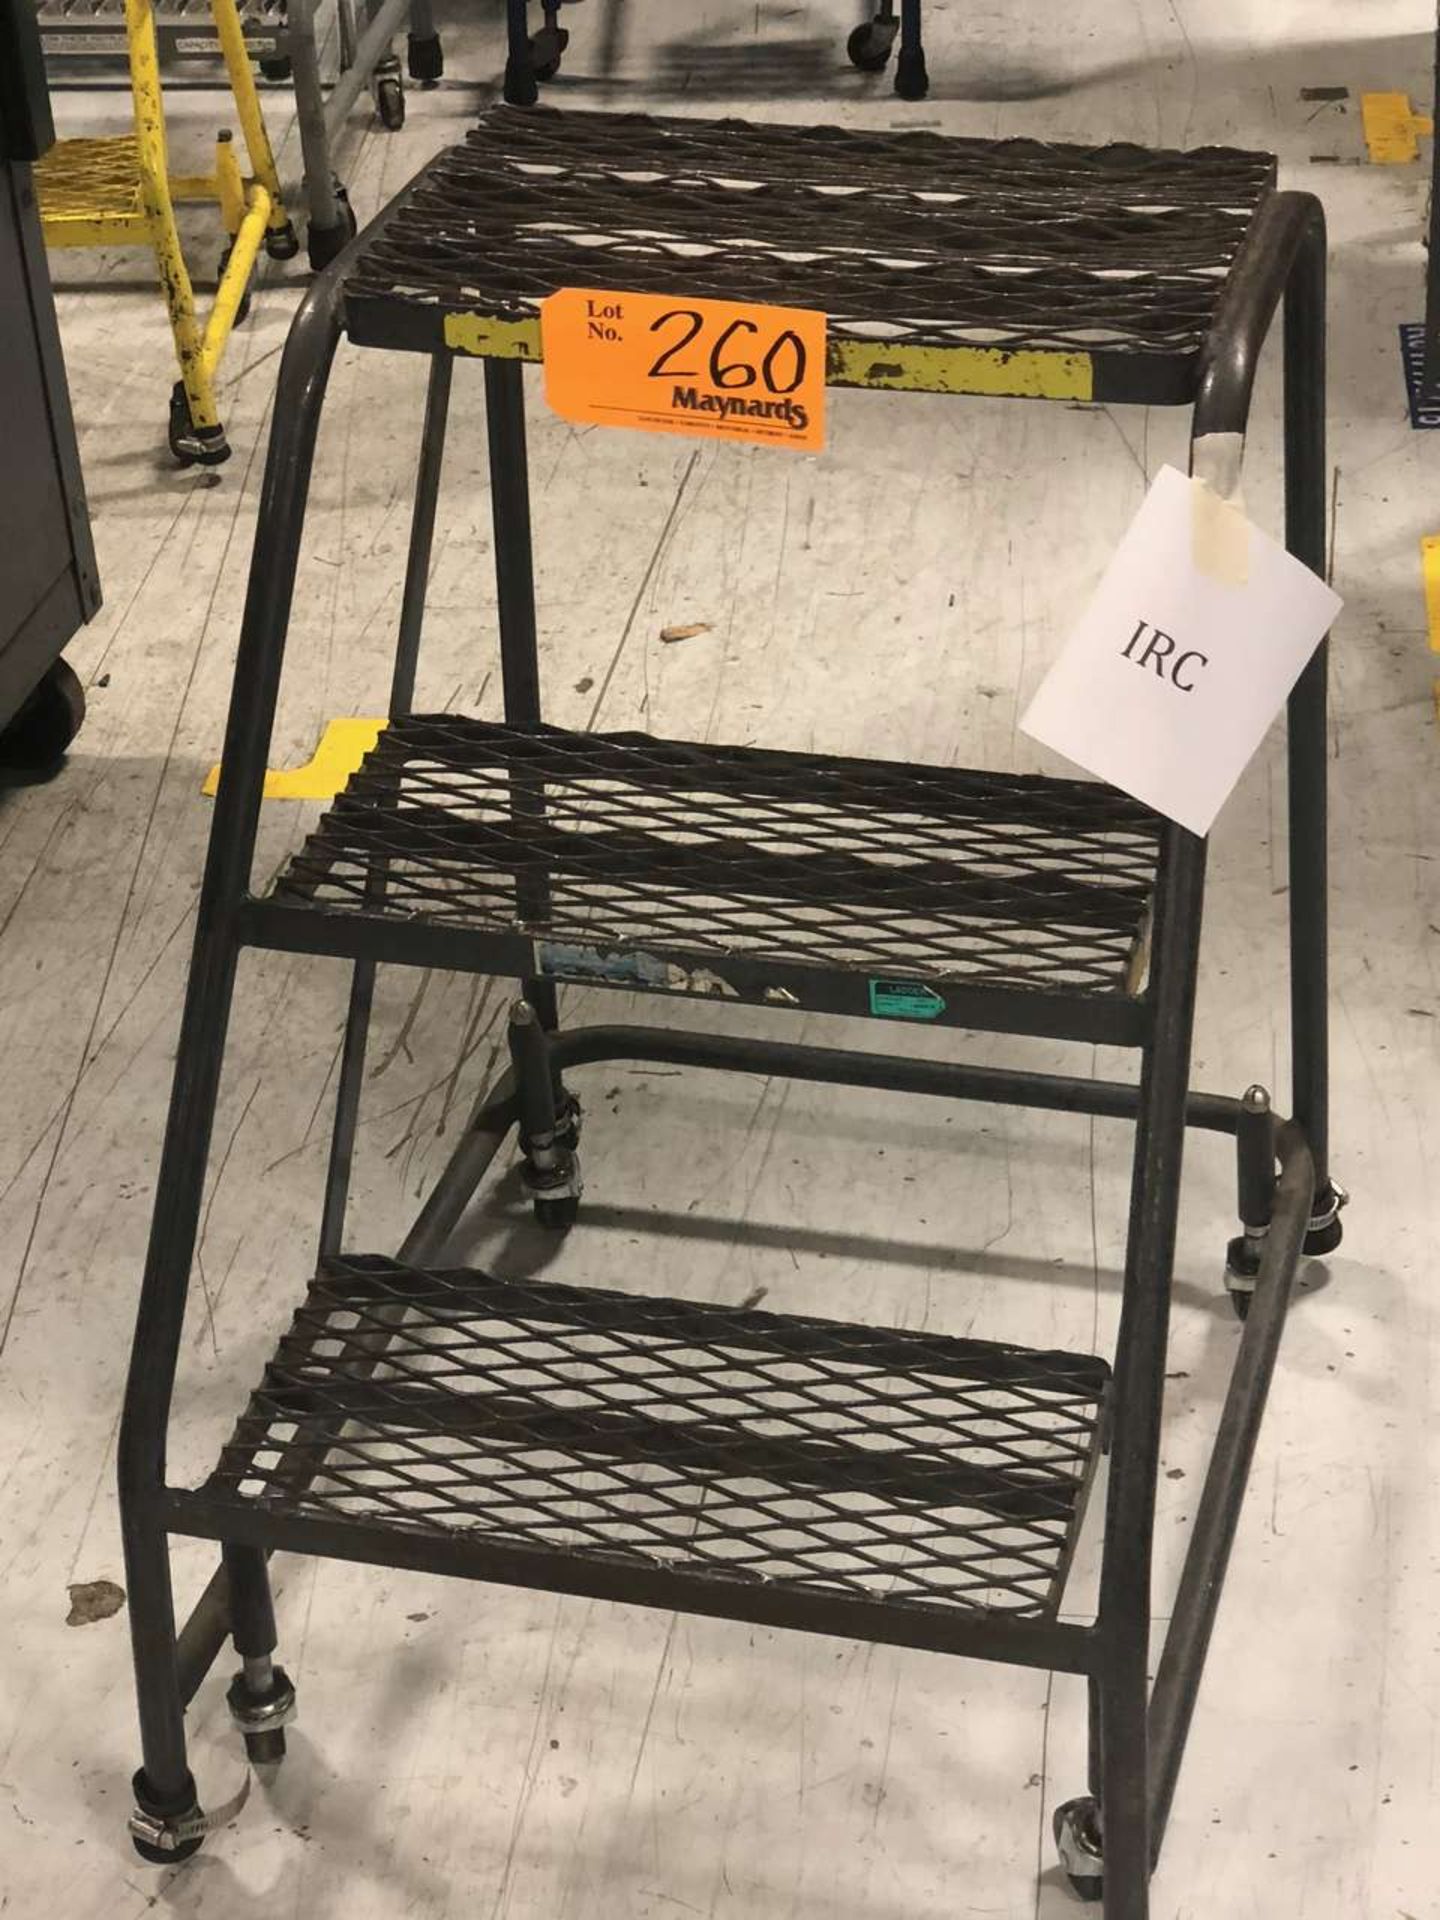 (7) Portable ladders